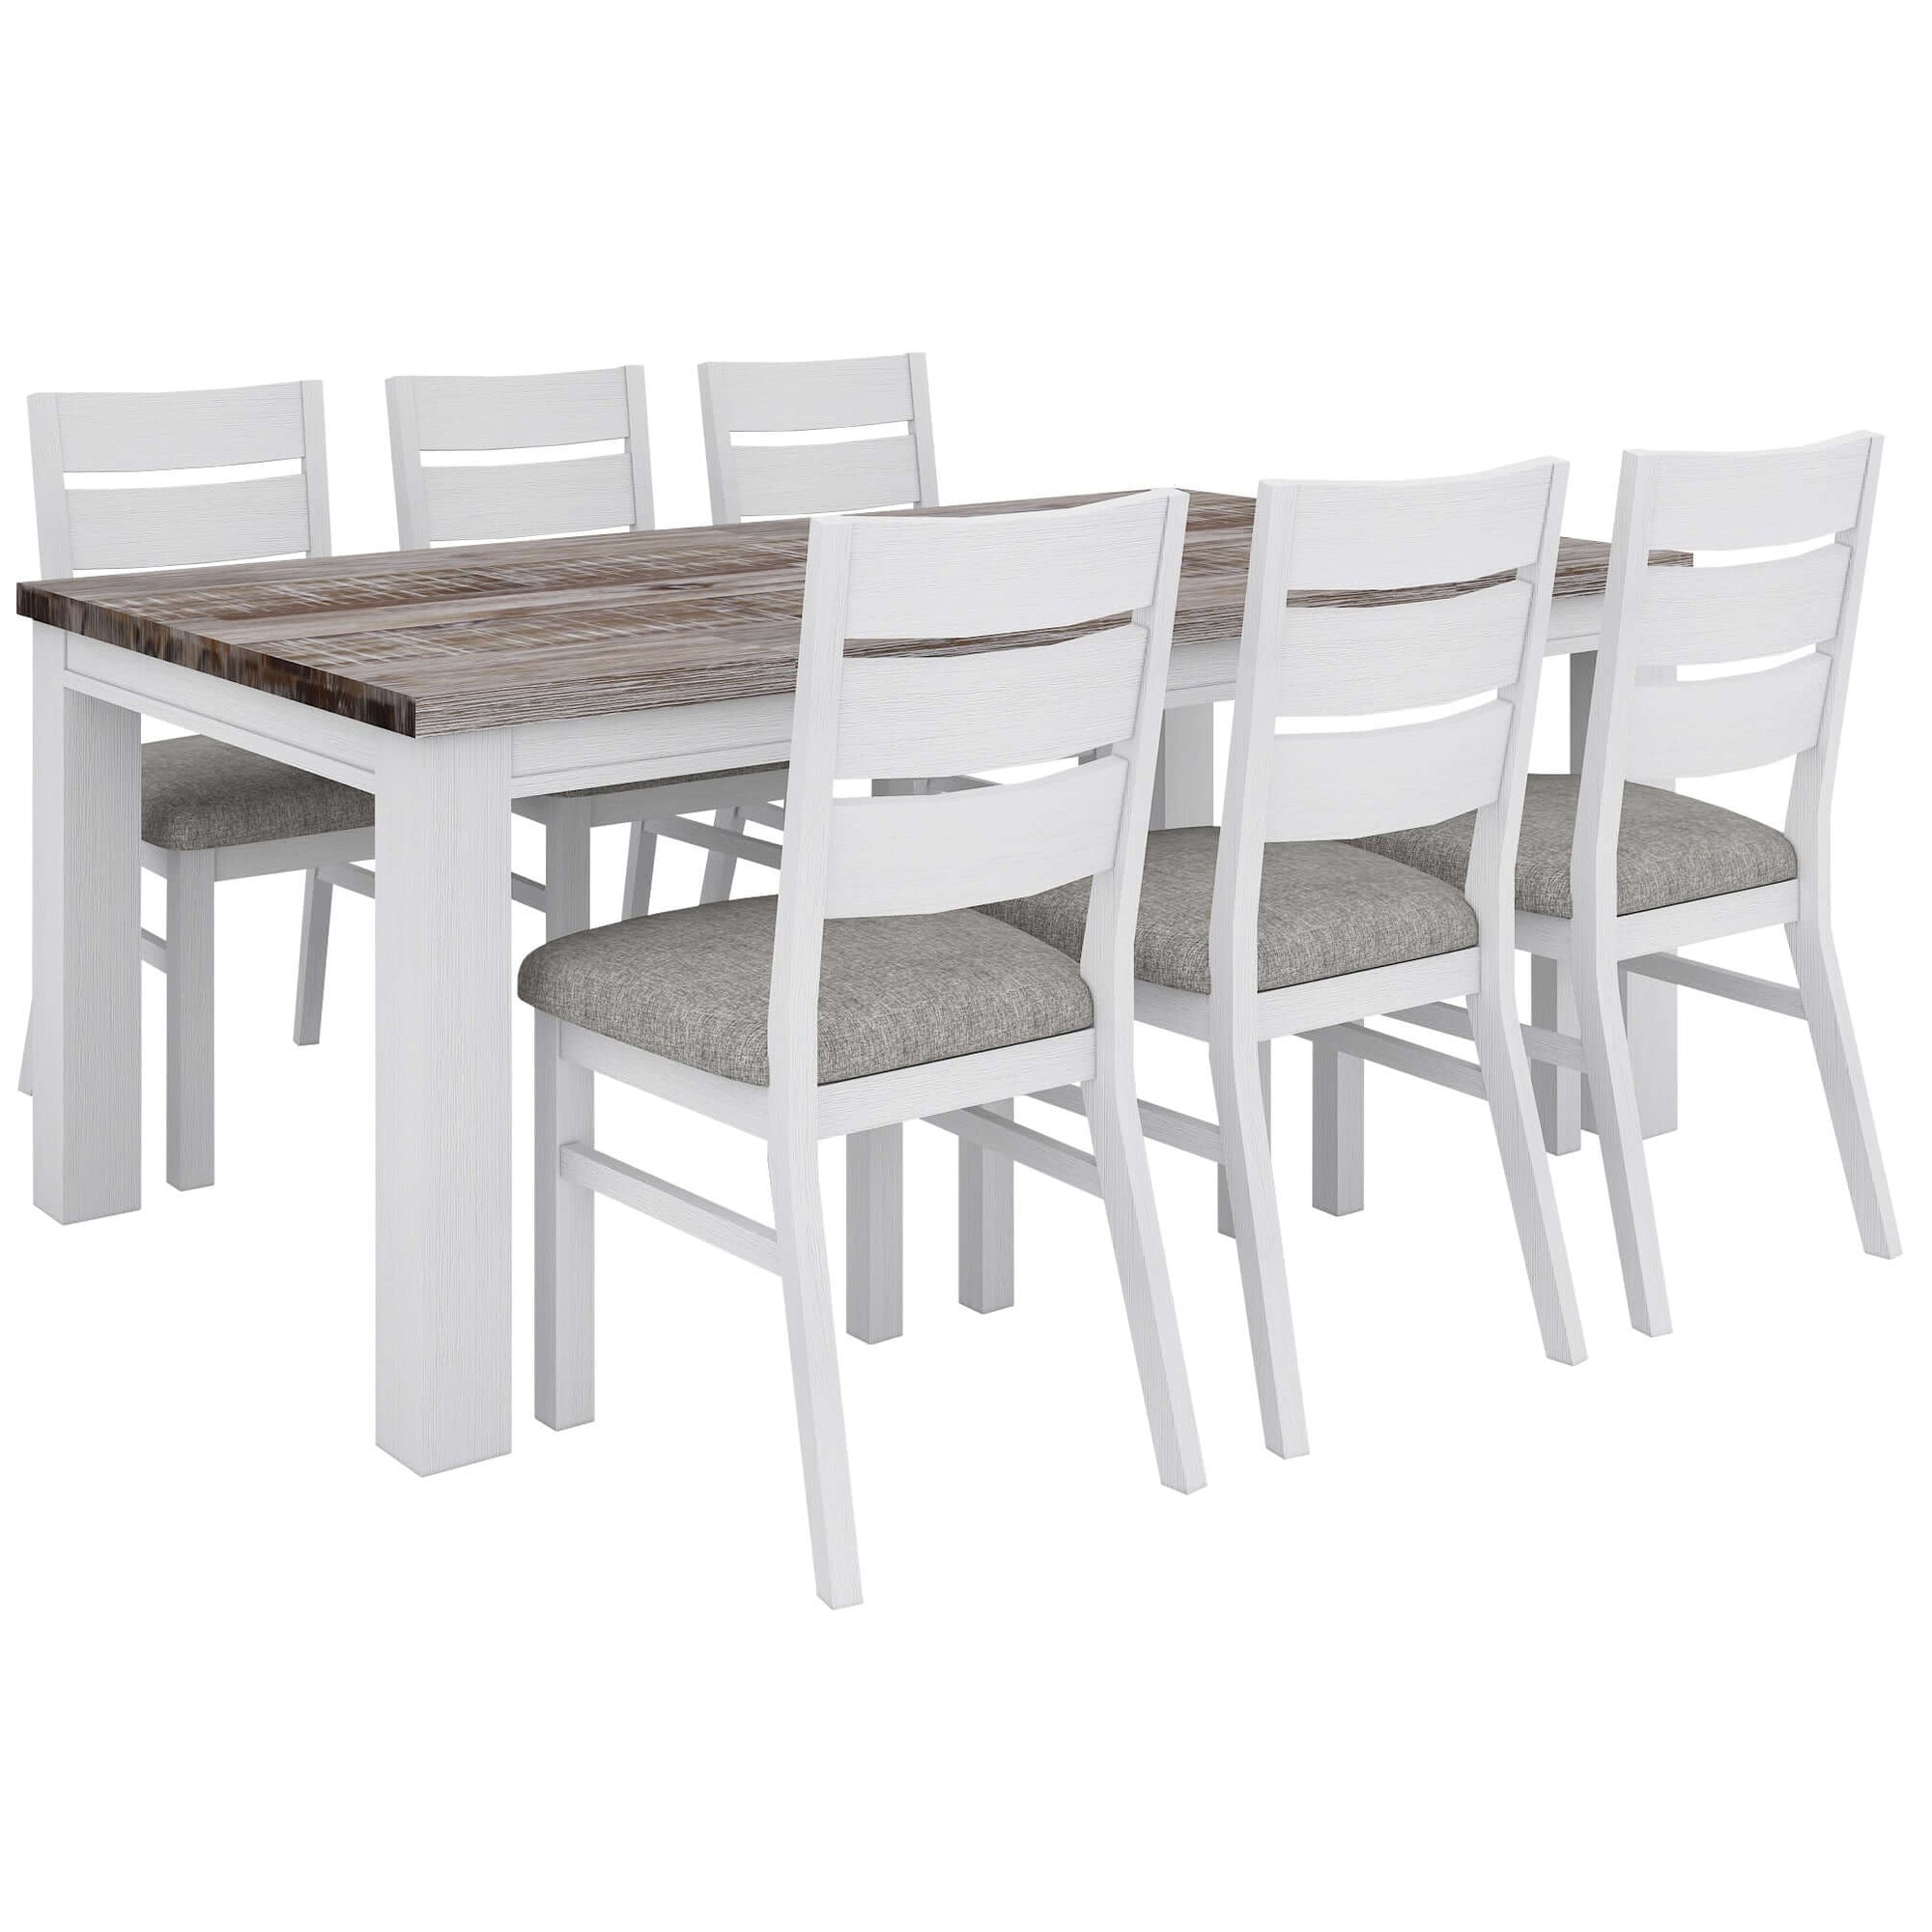 Plumeria Dining Chair Set of 8 Solid Acacia Wood Dining Furniture - White Brush-Upinteriors